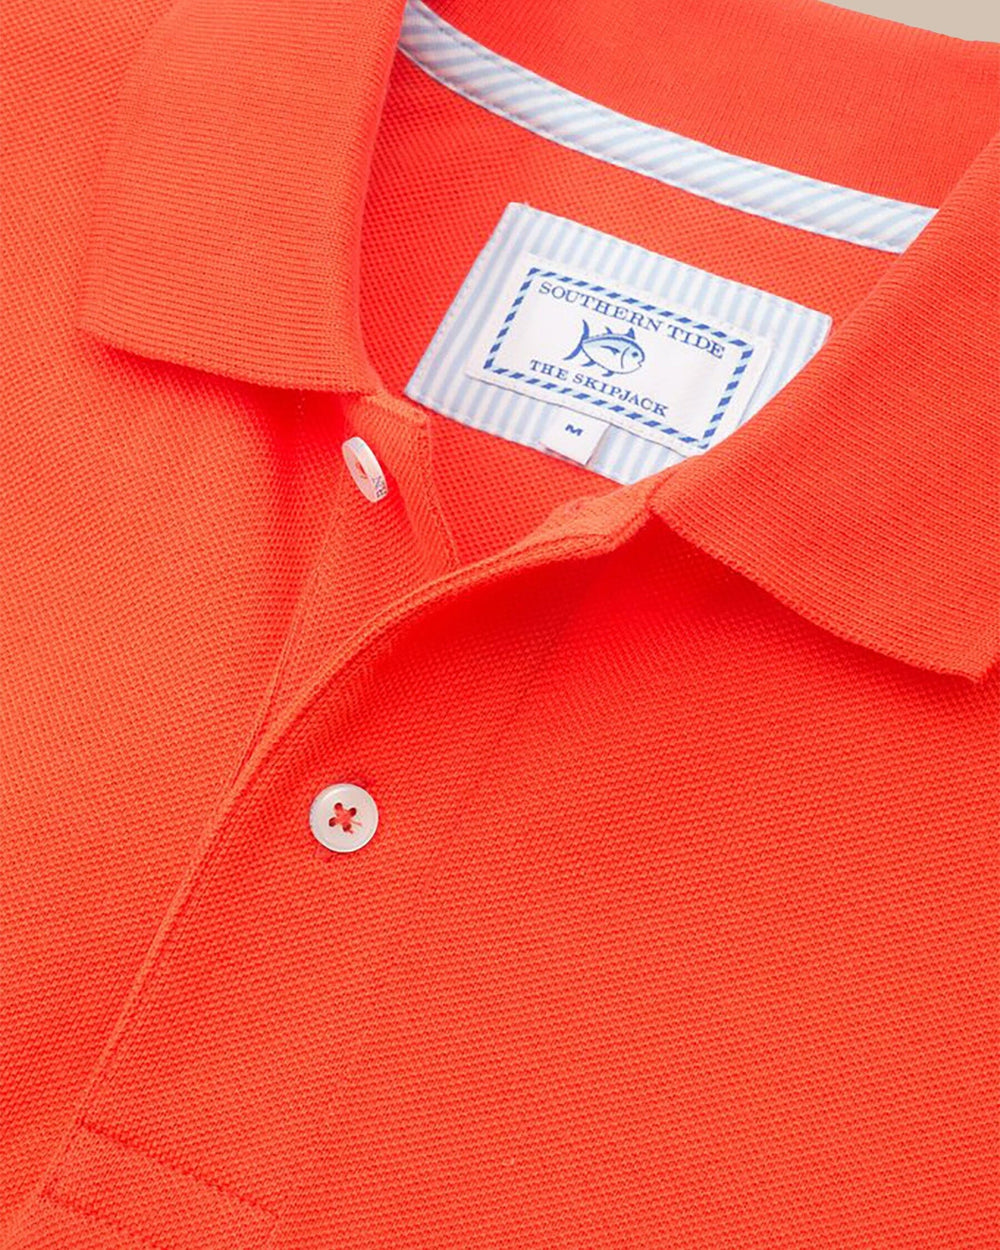 The detail view of the Men's Orange Skipjack Gameday Colors Polo Shirt by Southern Tide - Endzone Orange